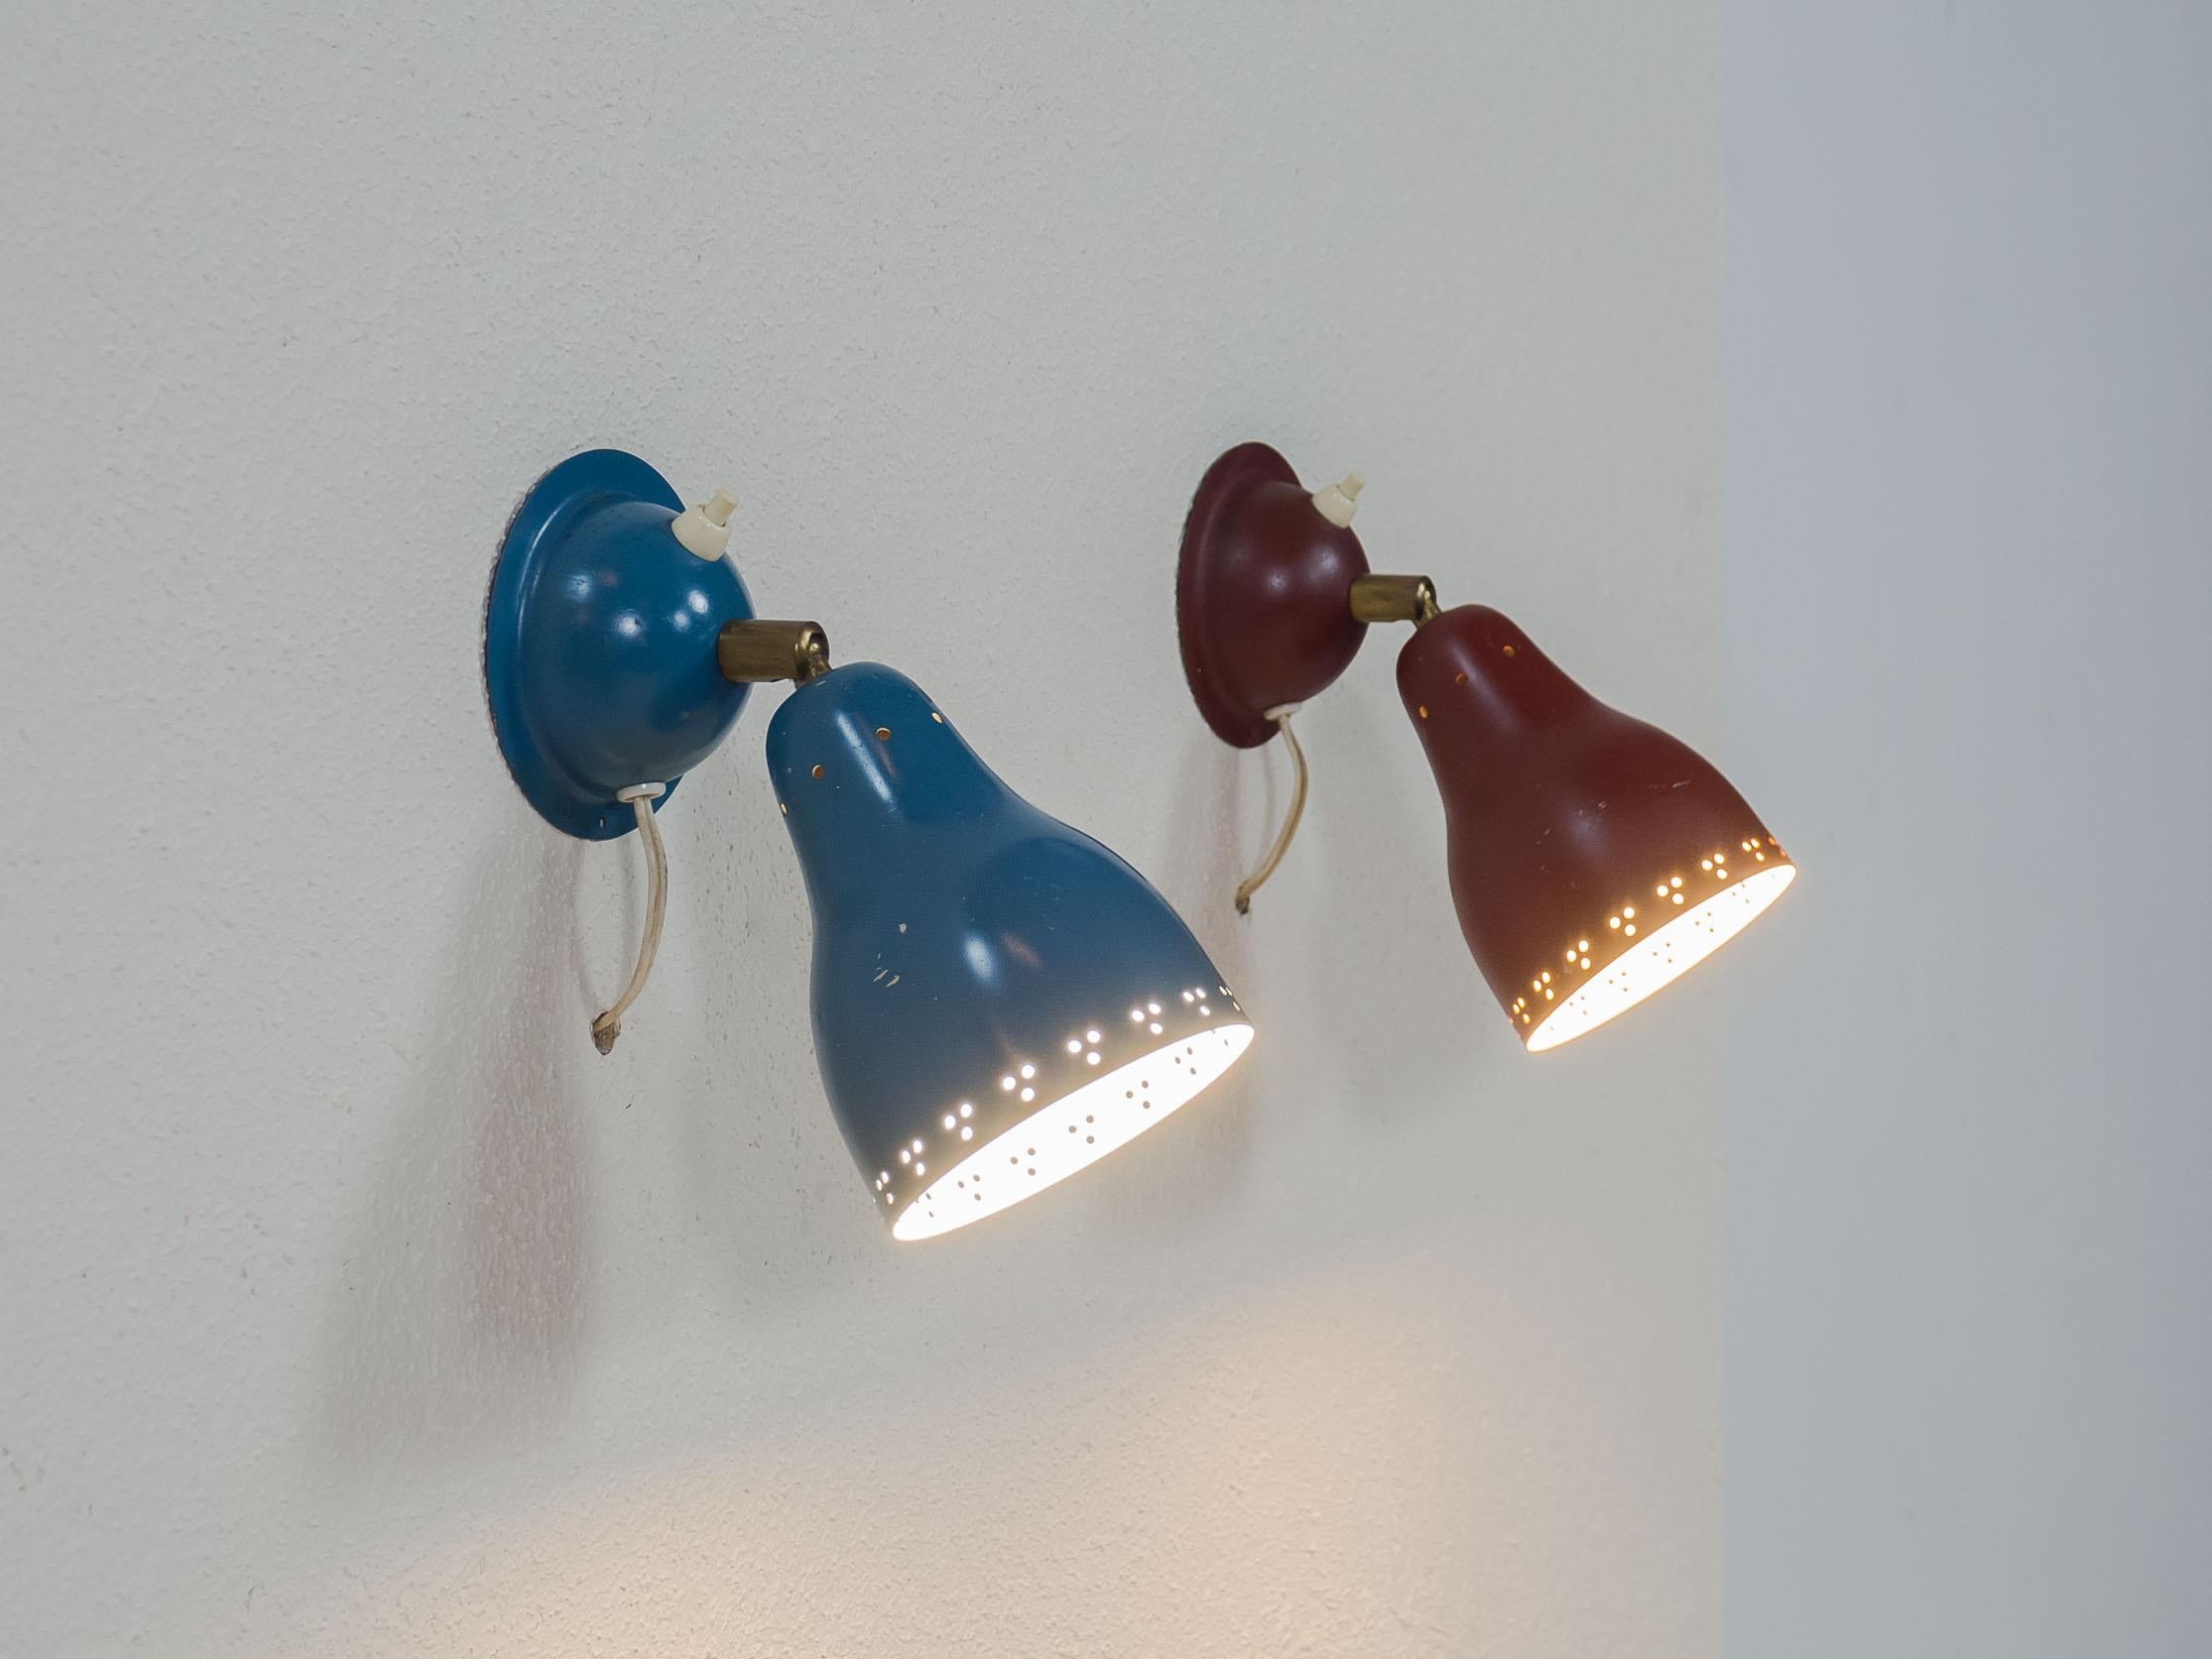 Set of two Swedish wall lights, most likely from the 1950s.

The two lamps are in their original blue and red lacquer, and have their original switches and swivels. They can be attached to a wall via a single screw.

The lamps are in all original